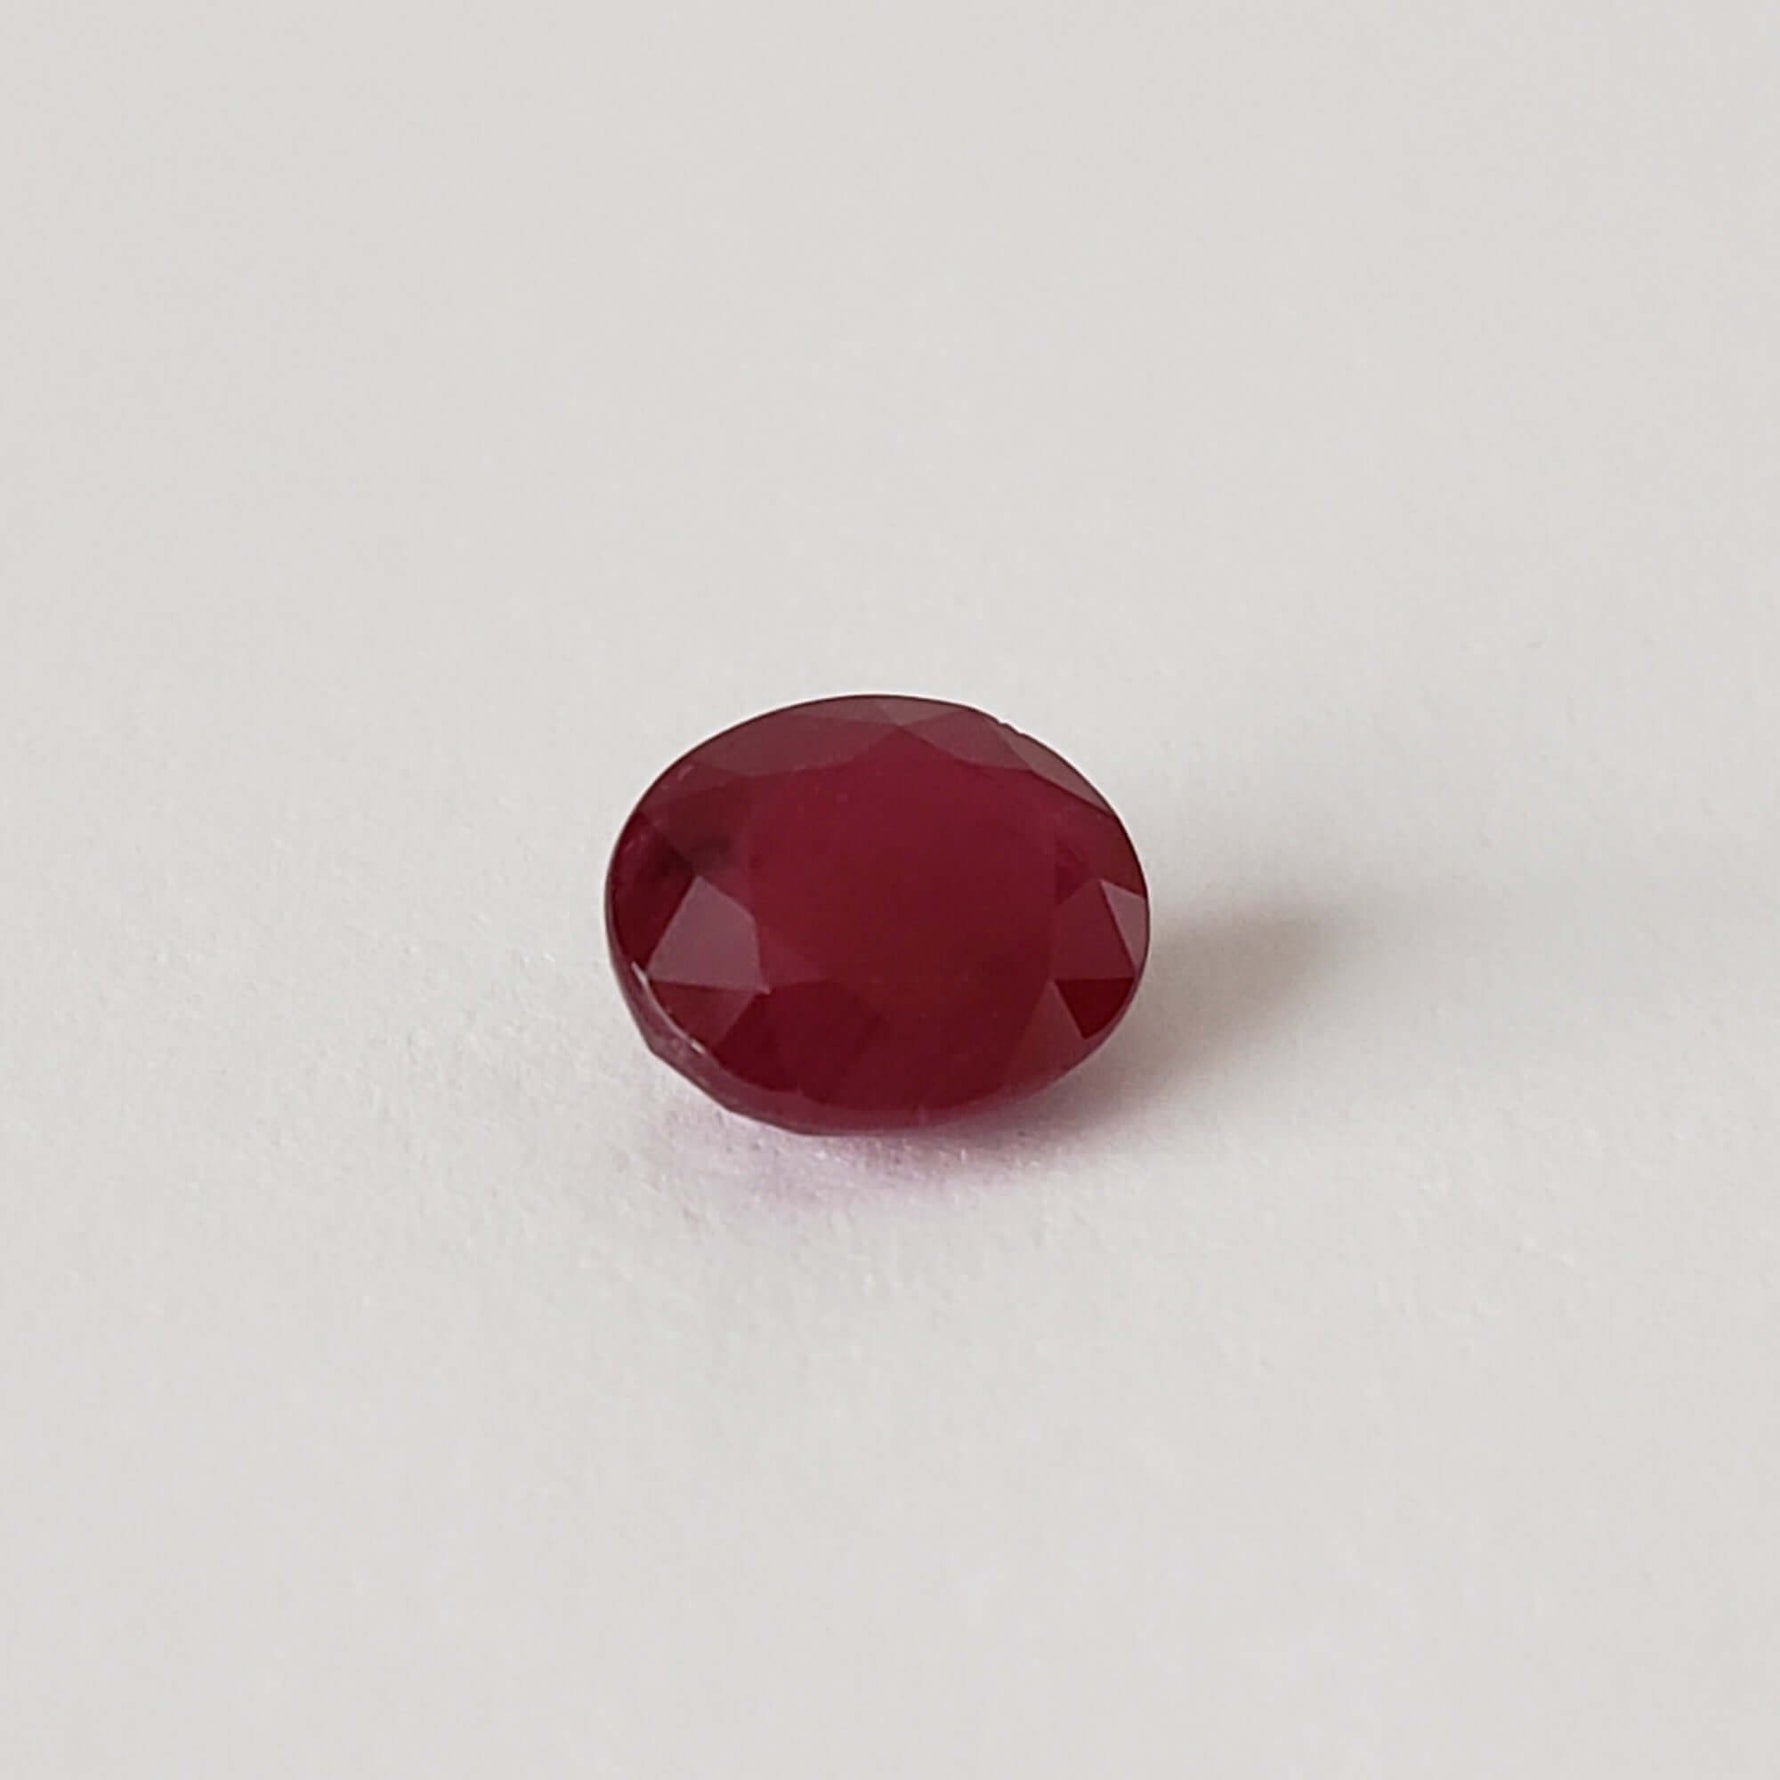 Ruby | Oval Cut | Top Pigeon Blood Red | 7.5x6.3mm 1.85ct | Myanmar